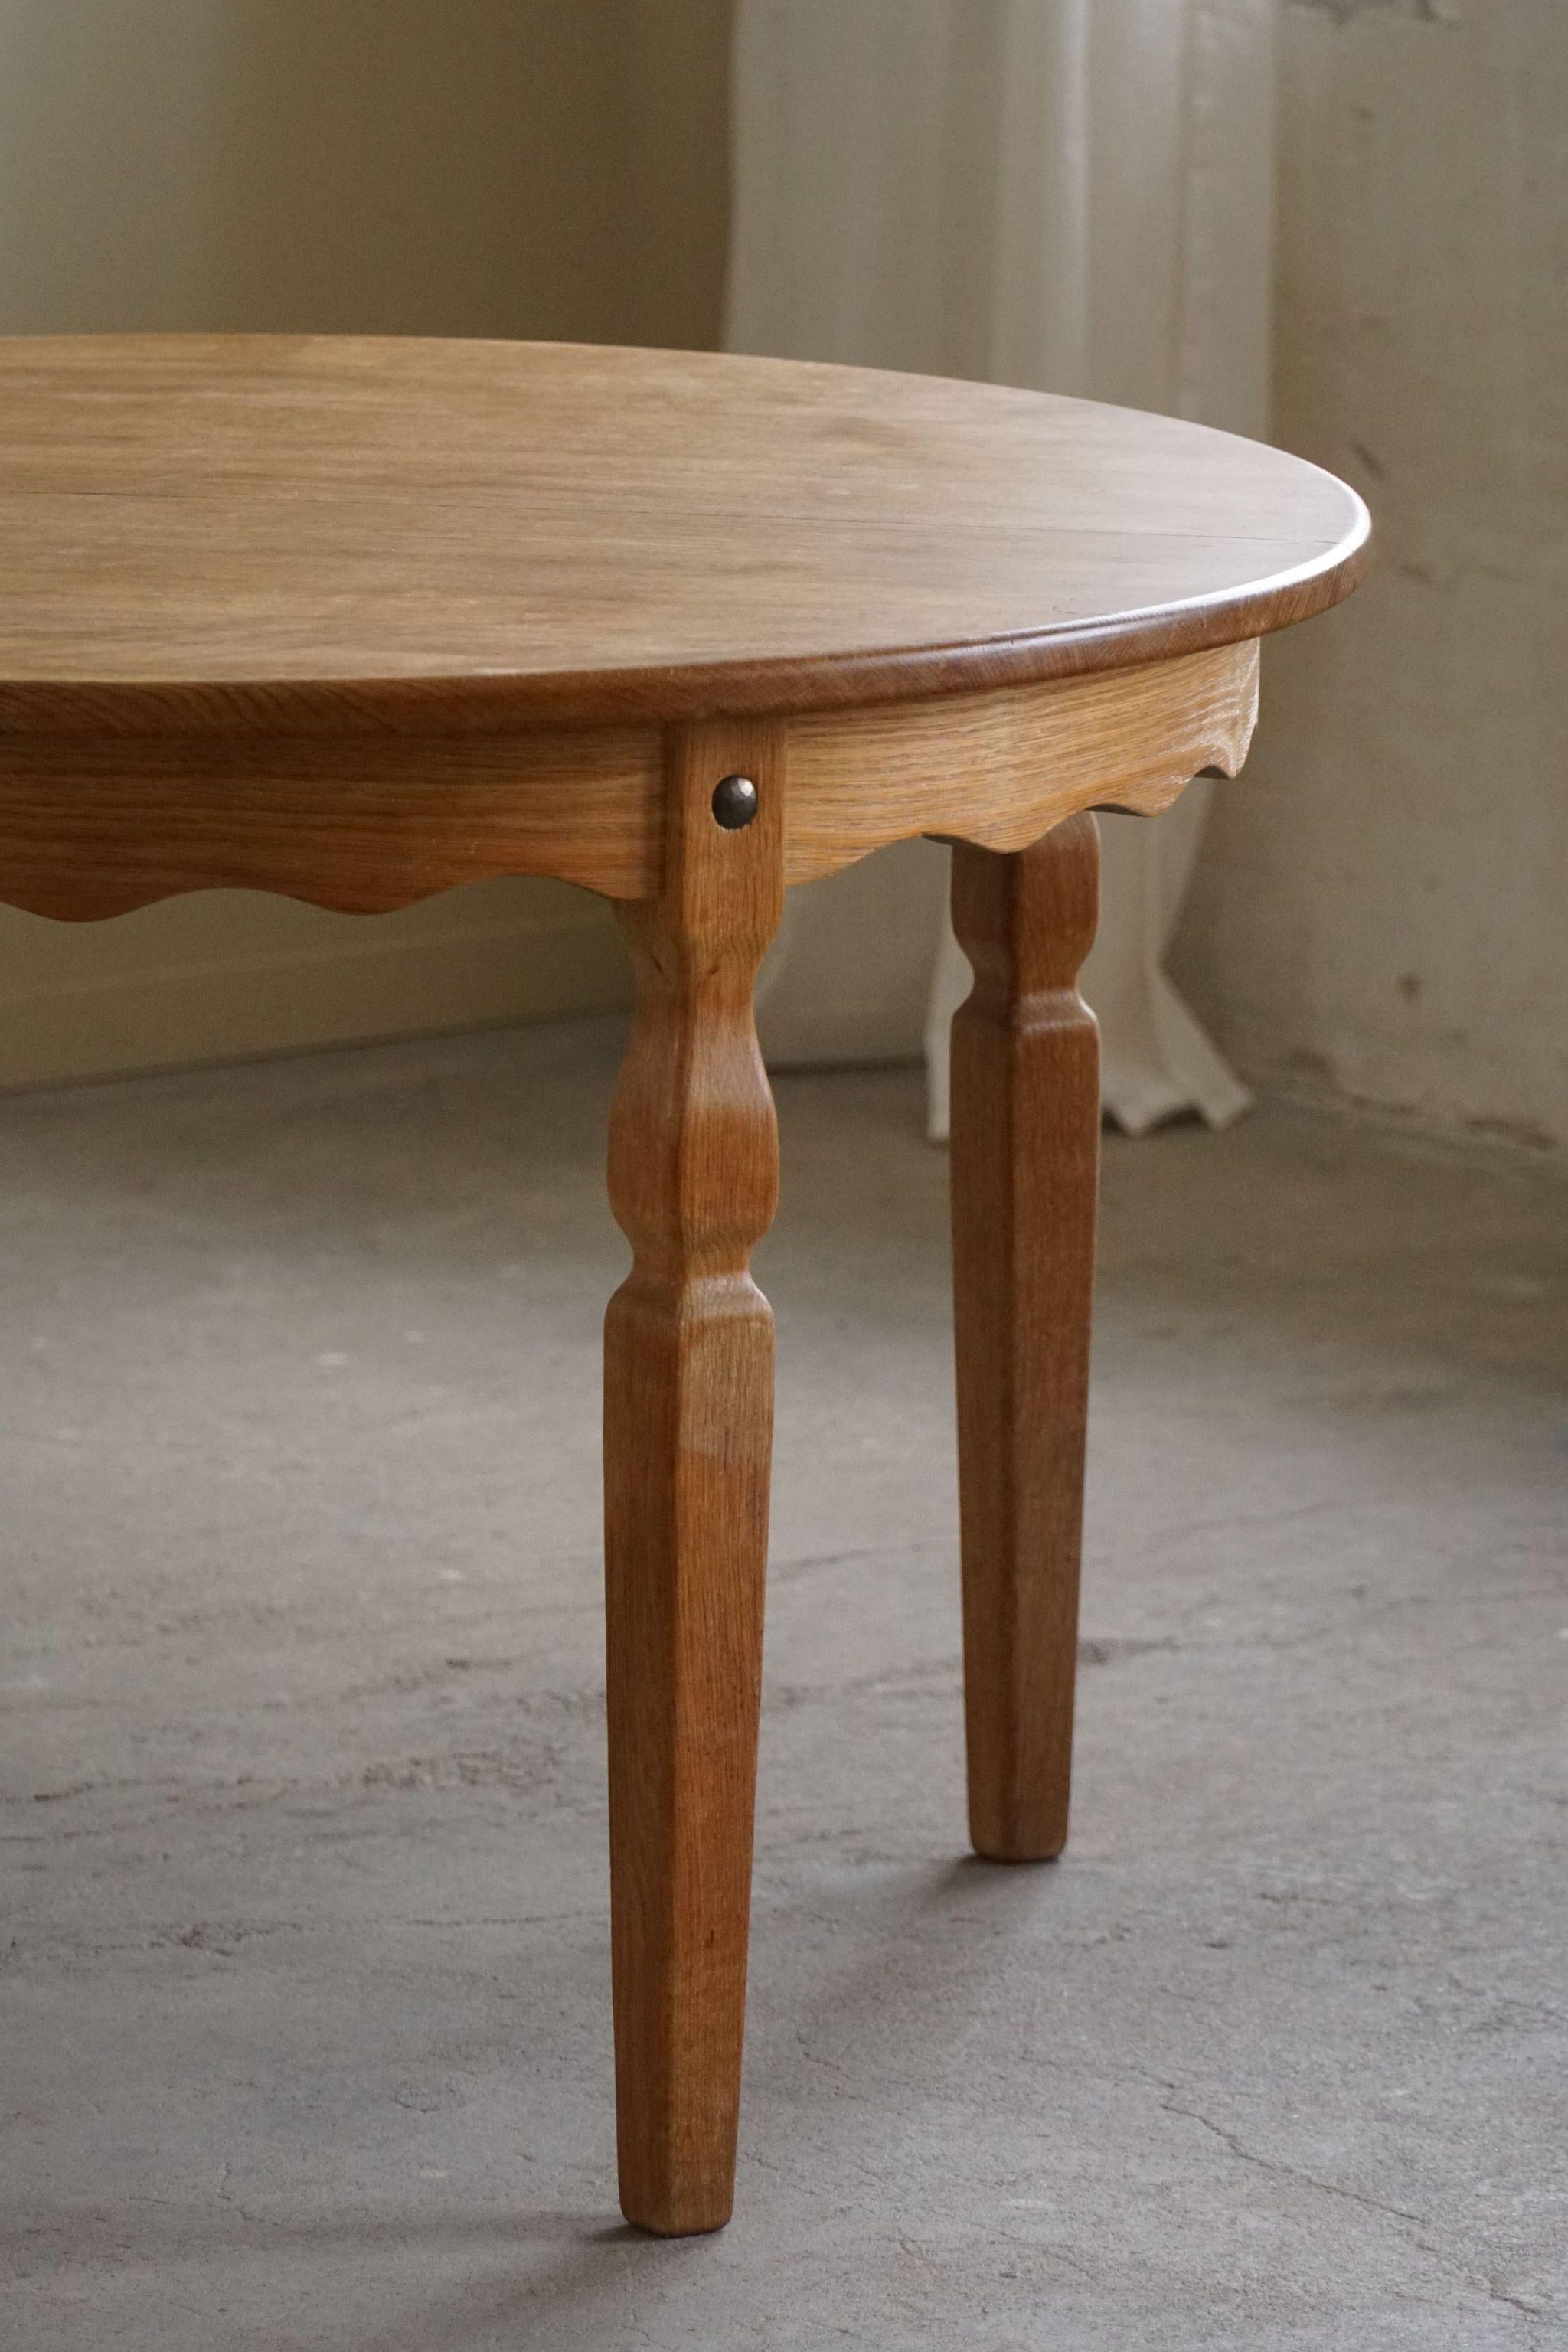 Danish Modern, Round Dining Table in Oak with Two Extensions, Mid Century, 1960s For Sale 3